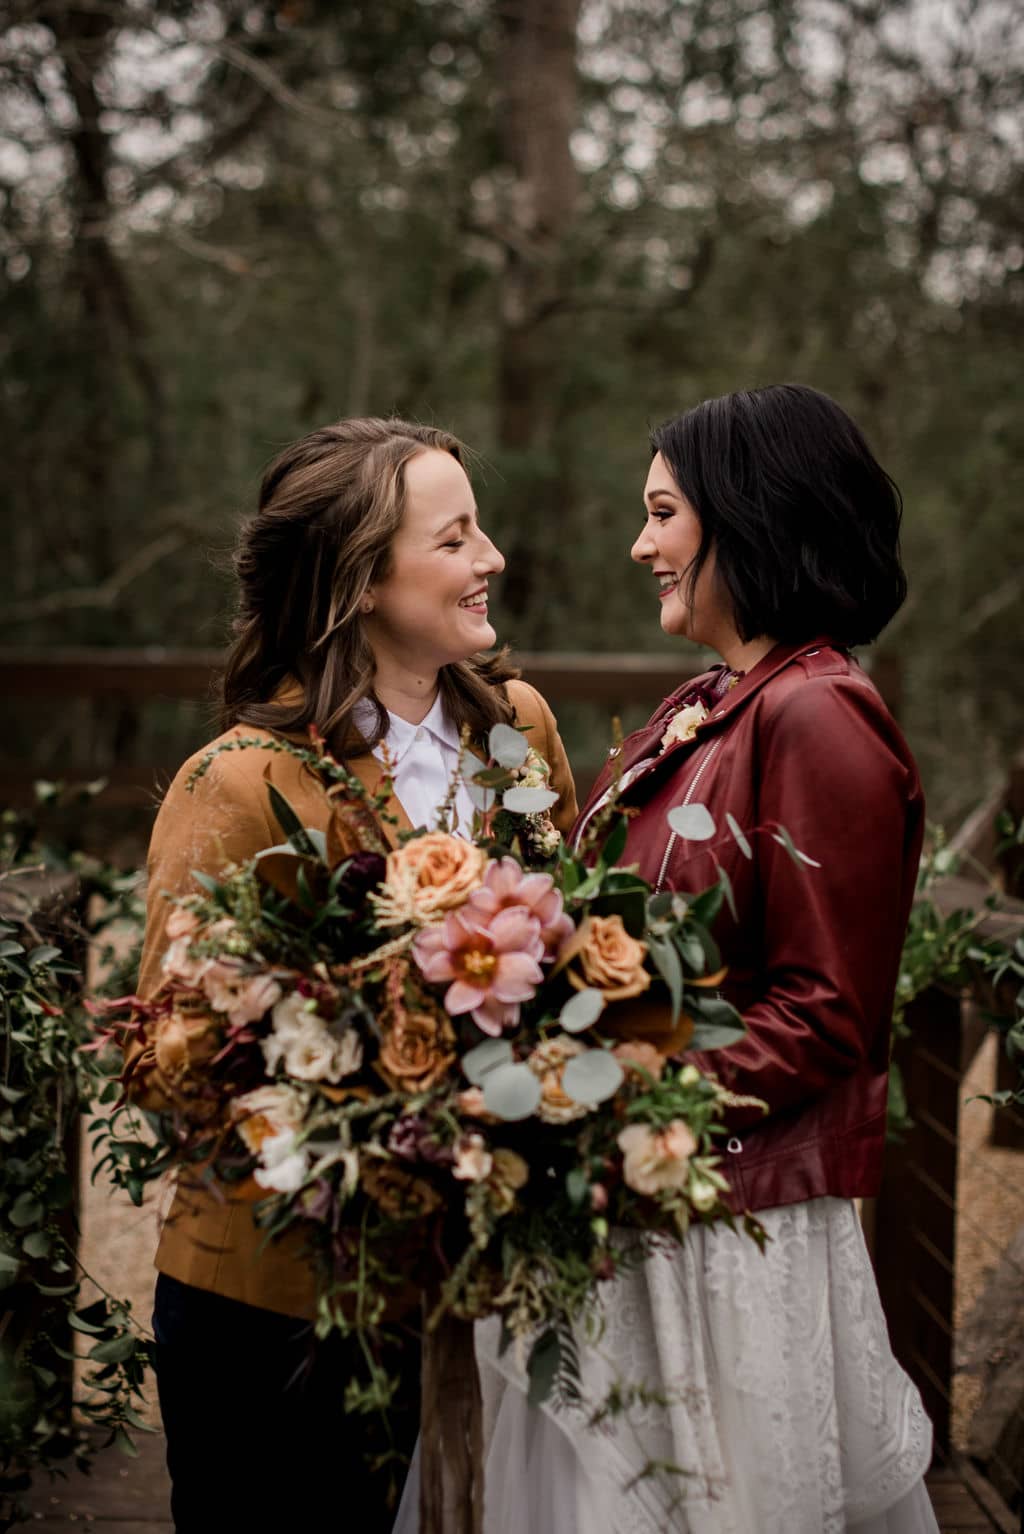 the two brides are laughing while holding a floral bouquet designed by texas wedding florist urban rubbish